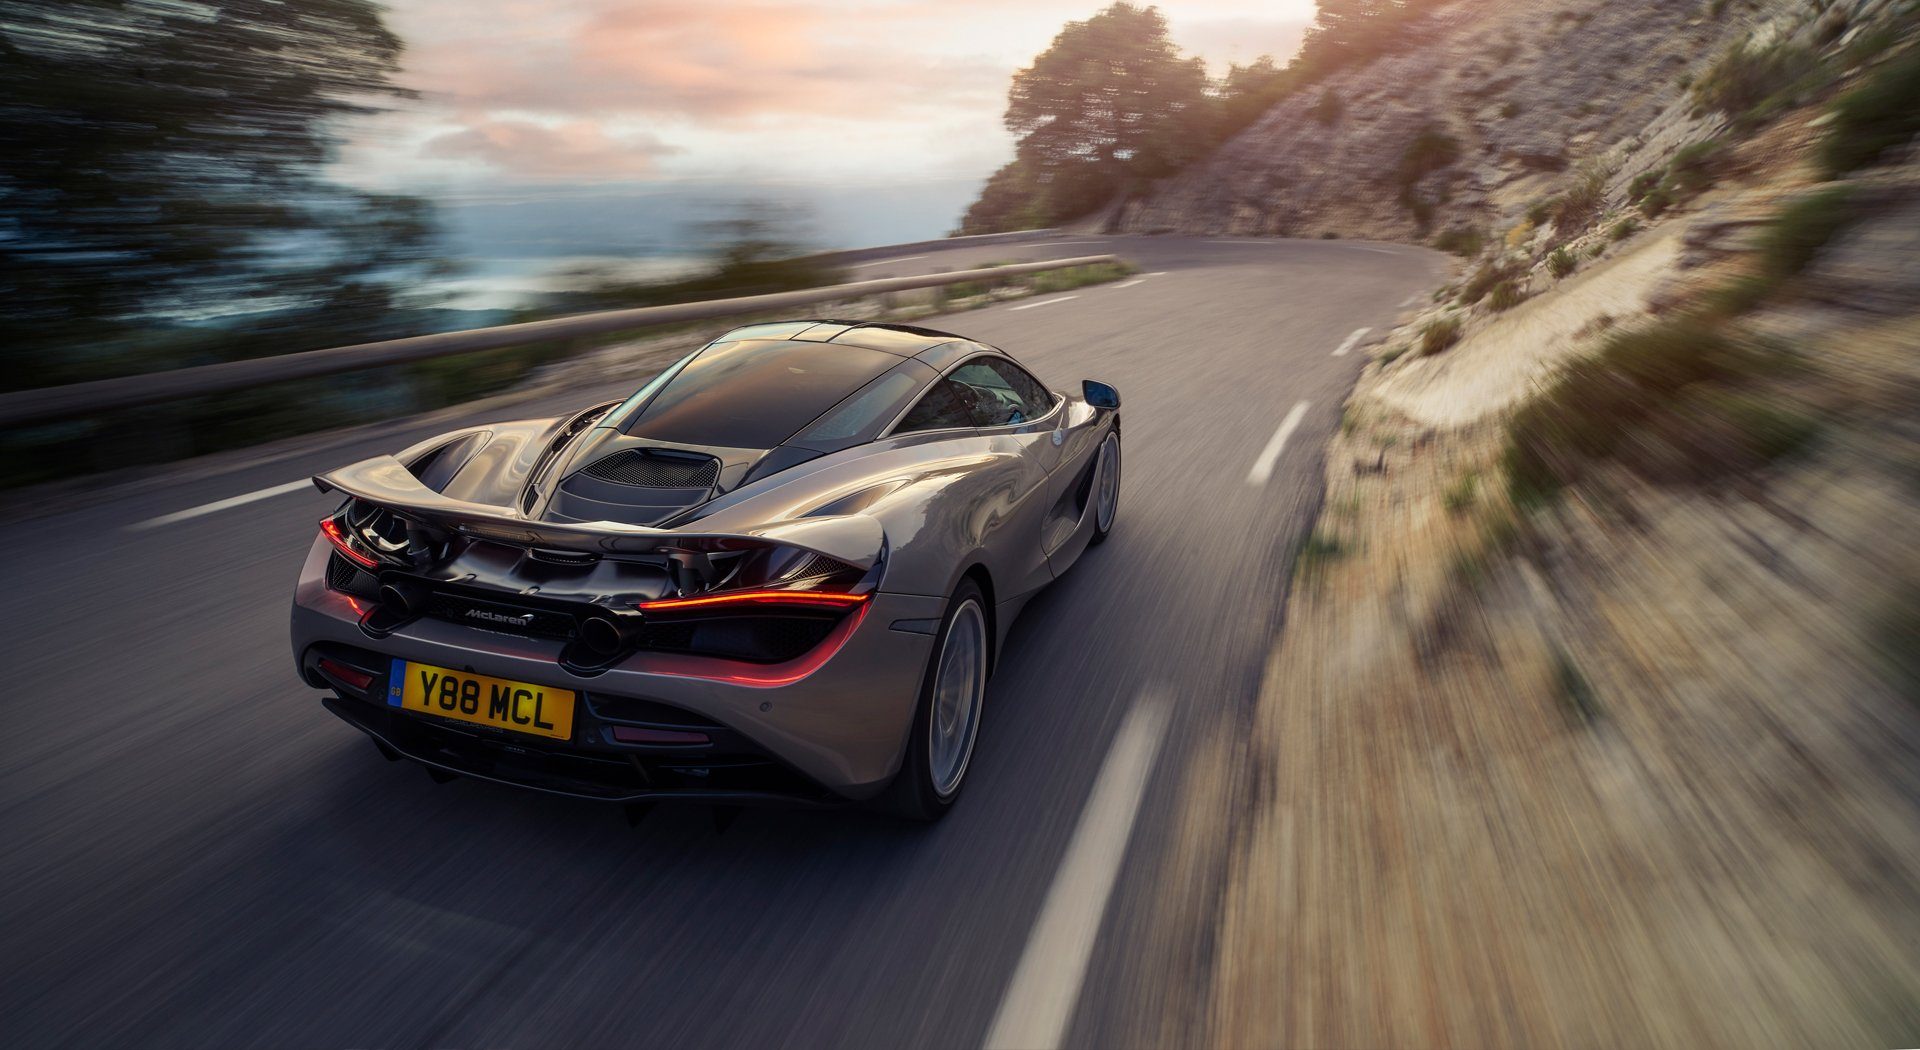 720s-coupe-rear-banner%20-%201920x1050%202.jpg